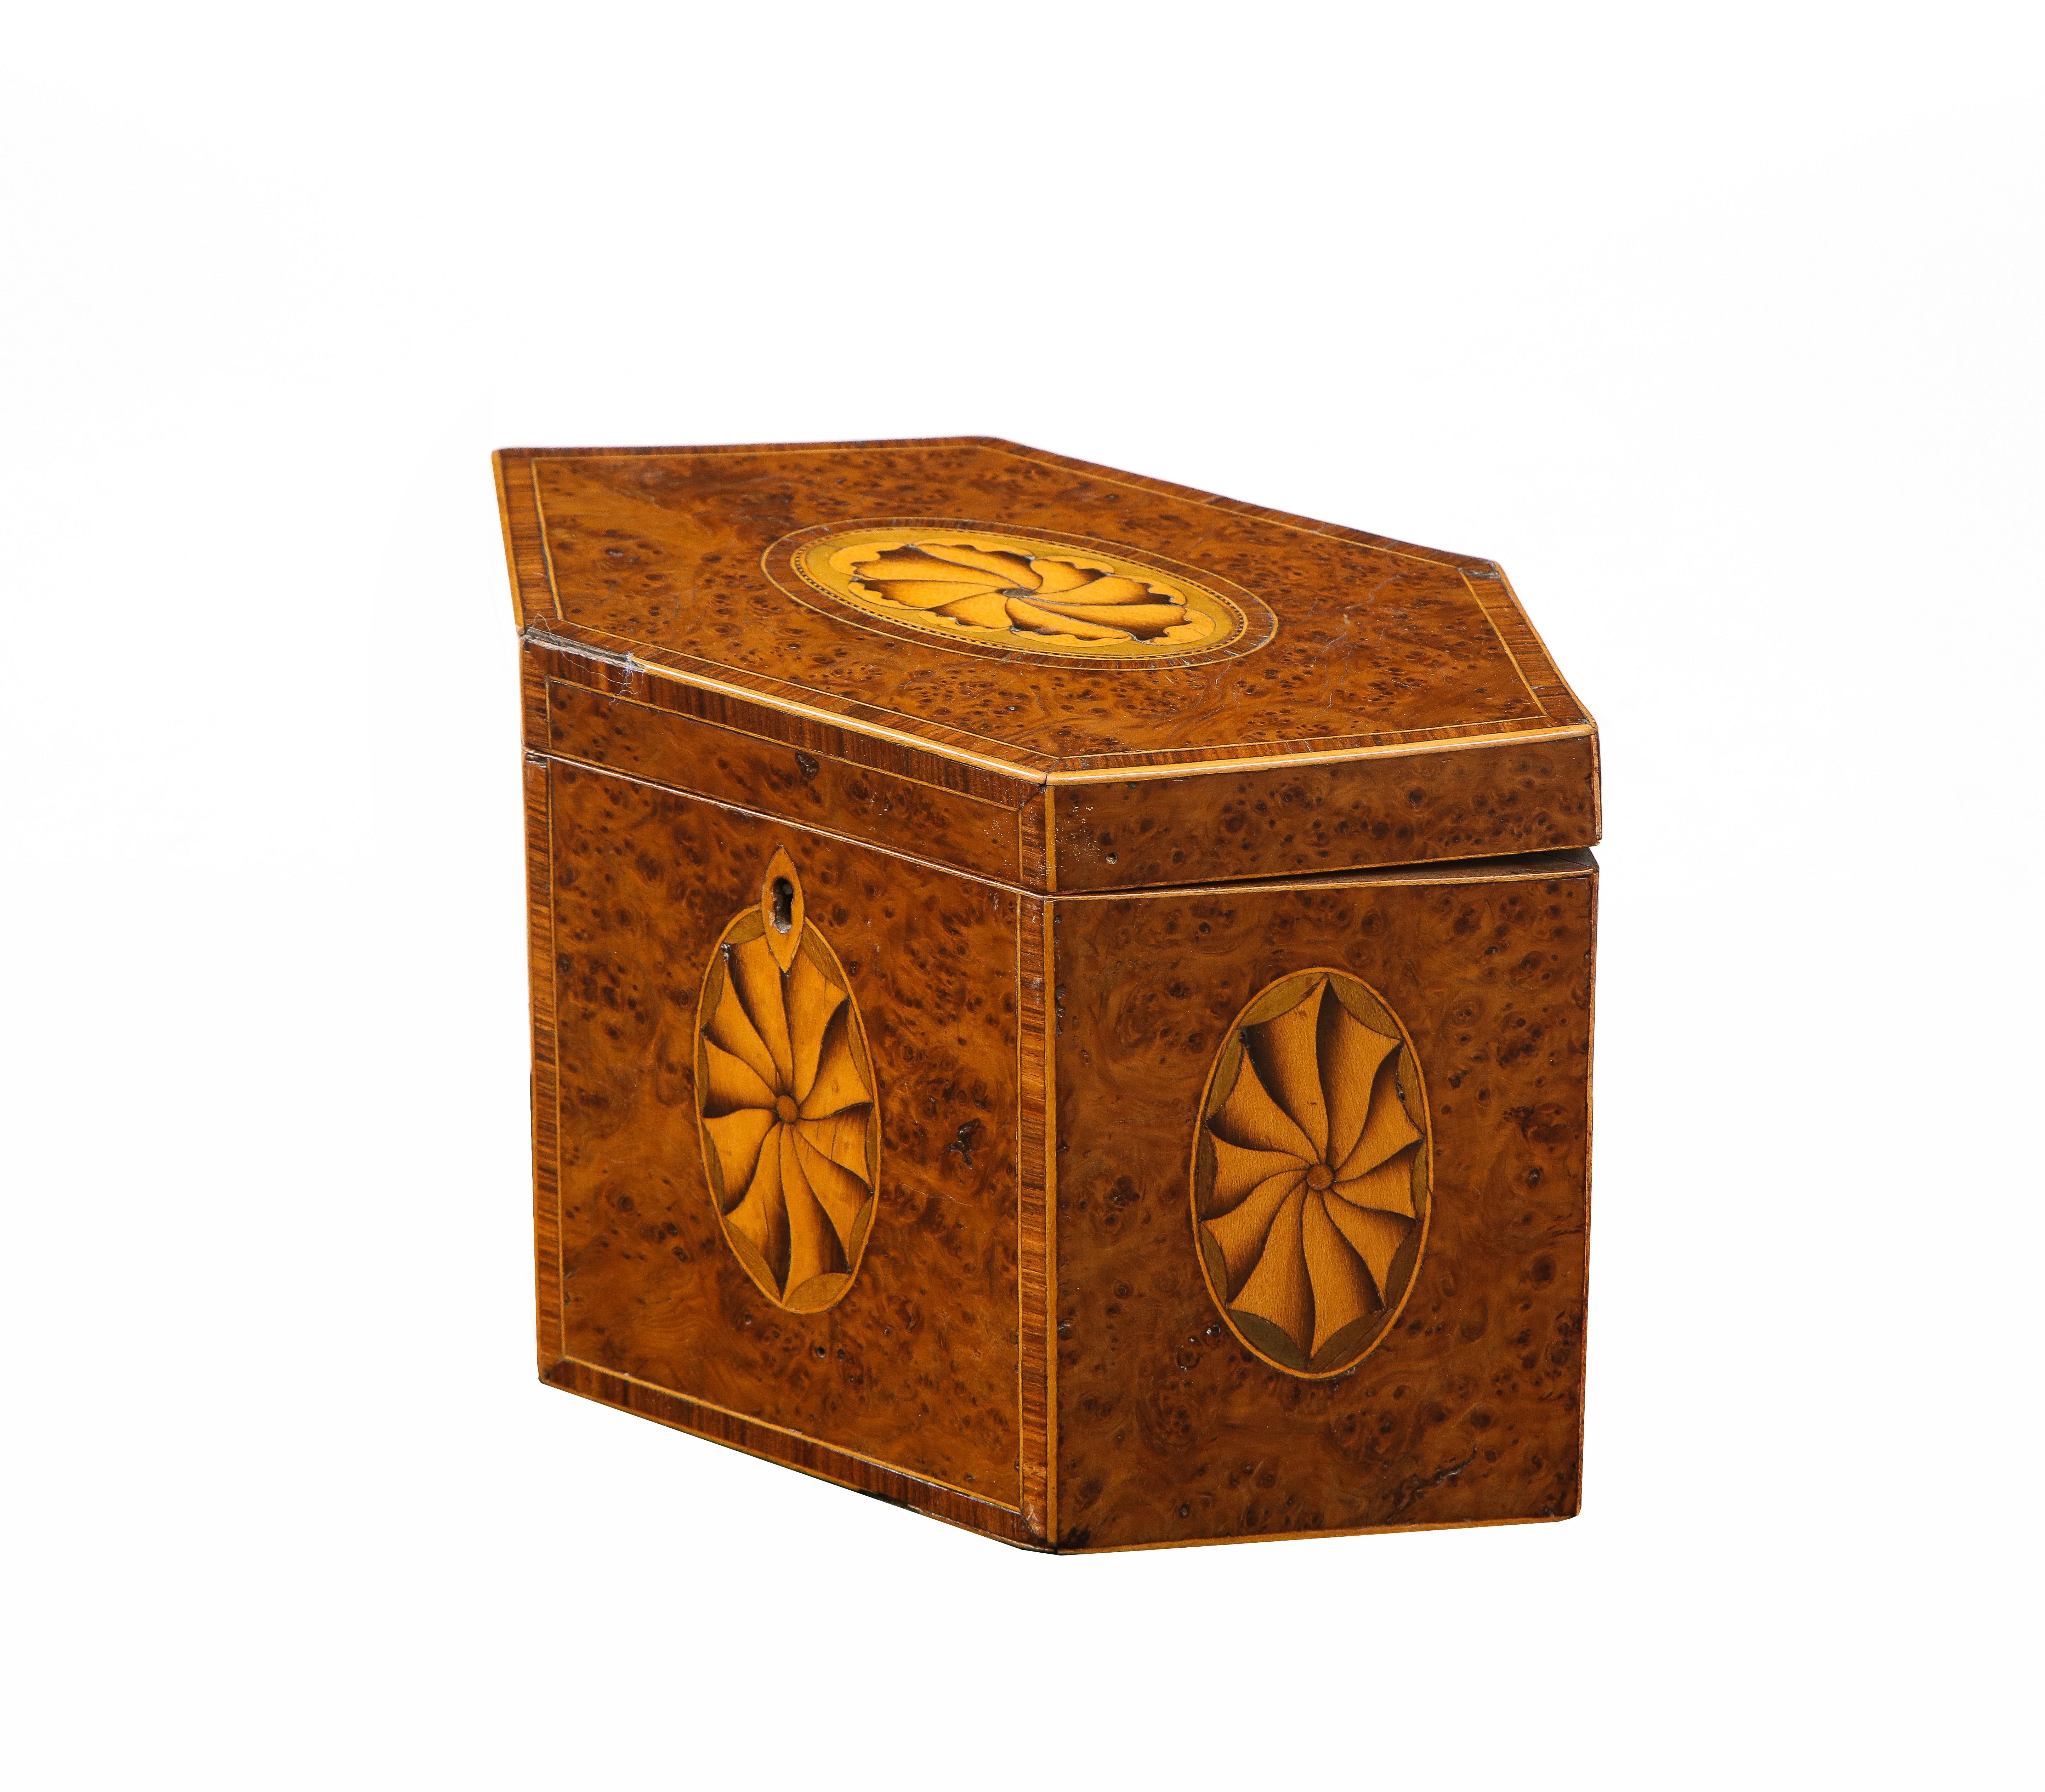 Very fine George III burr yew wood octagonal tea caddy with oval fan inlay in sand shaded holly and fustic and with kingwood banding and holly string inlay and possessing a nice, rich color.
 